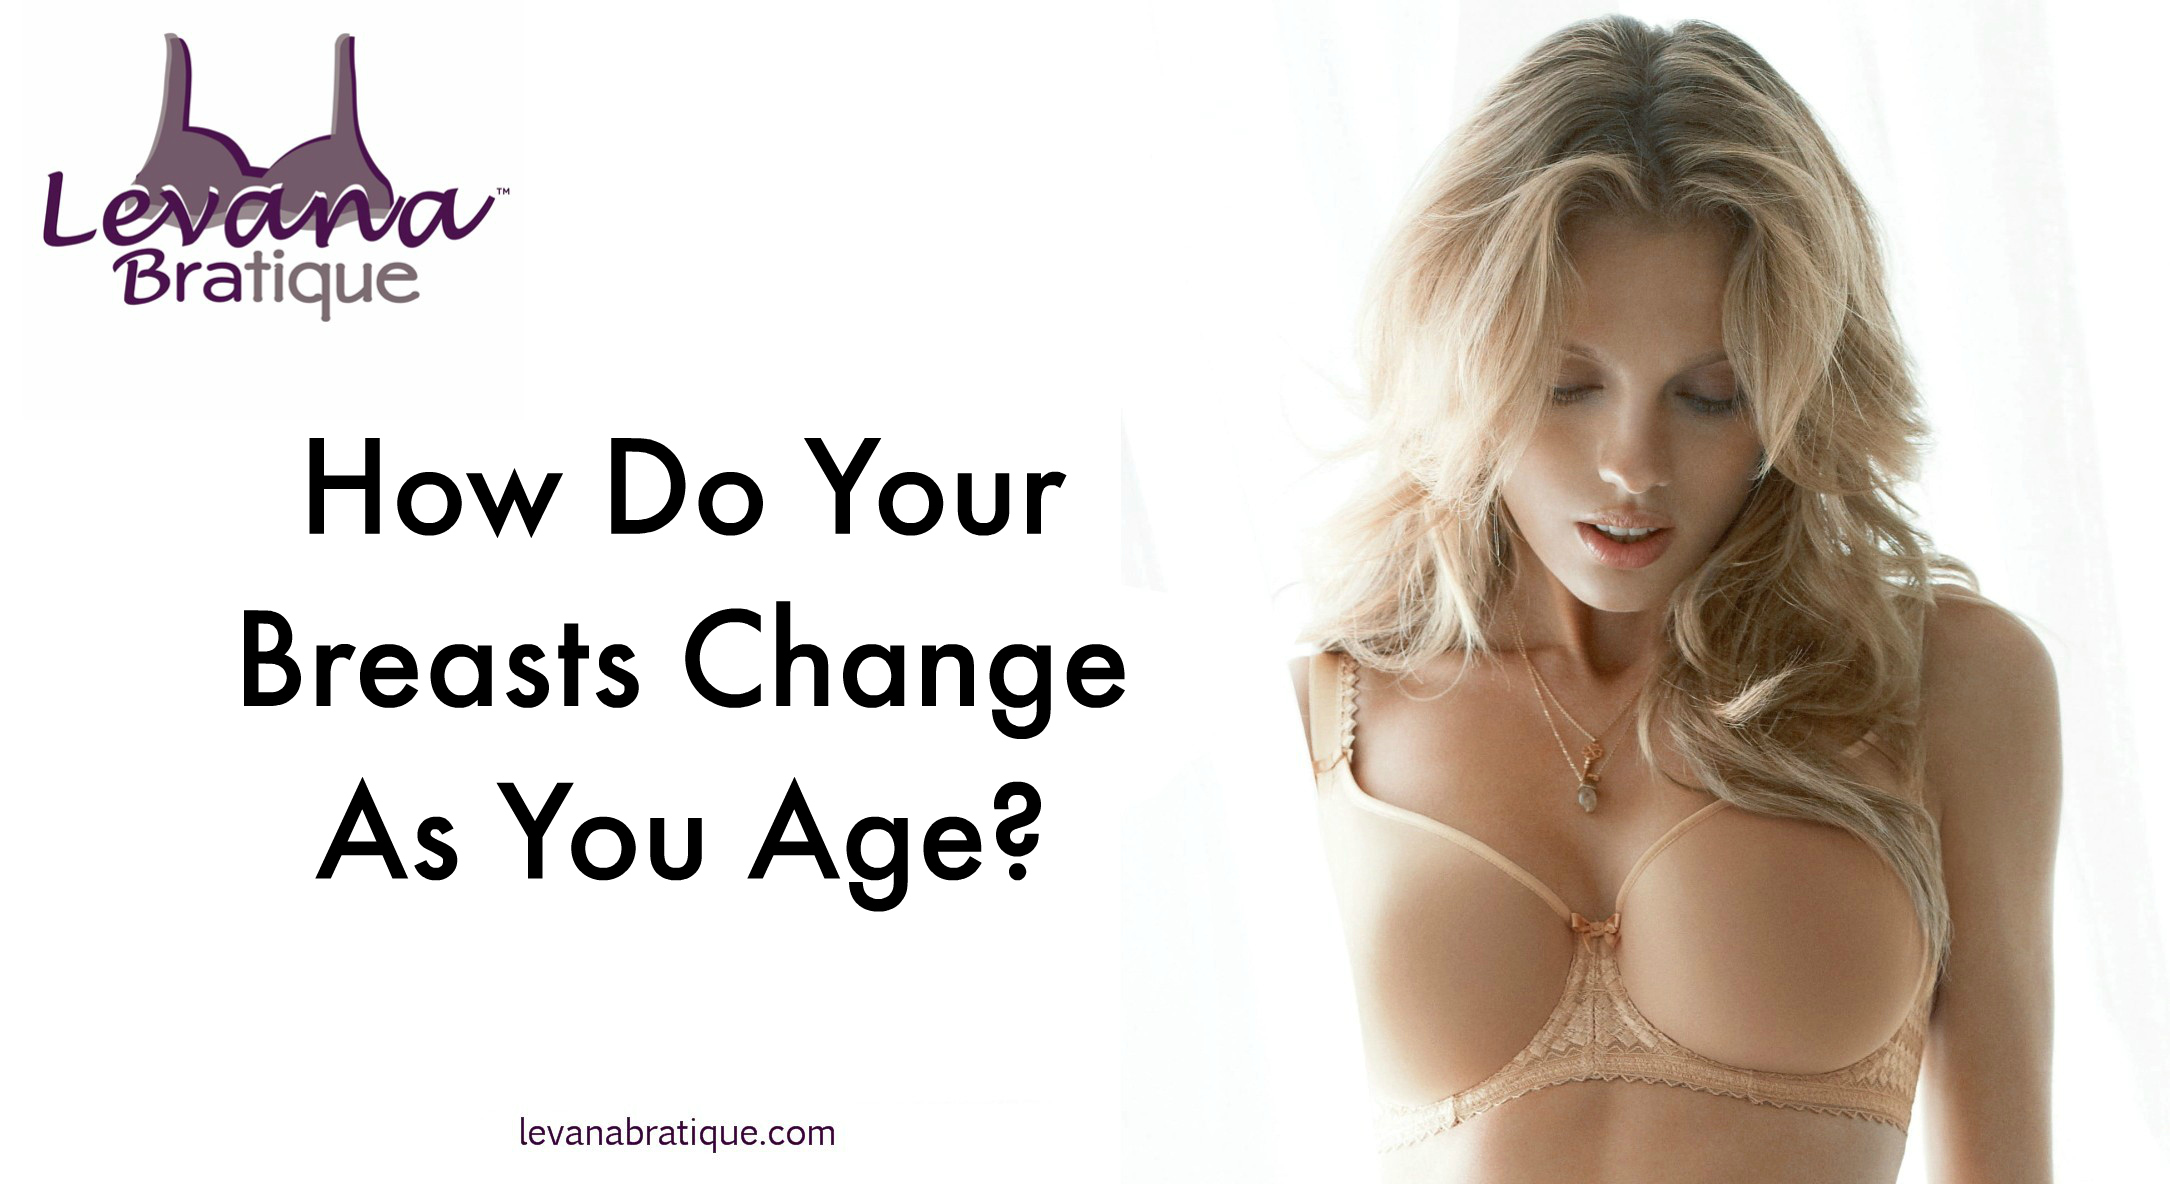 How Do Your Breasts Change with Age? - Levana Bratique